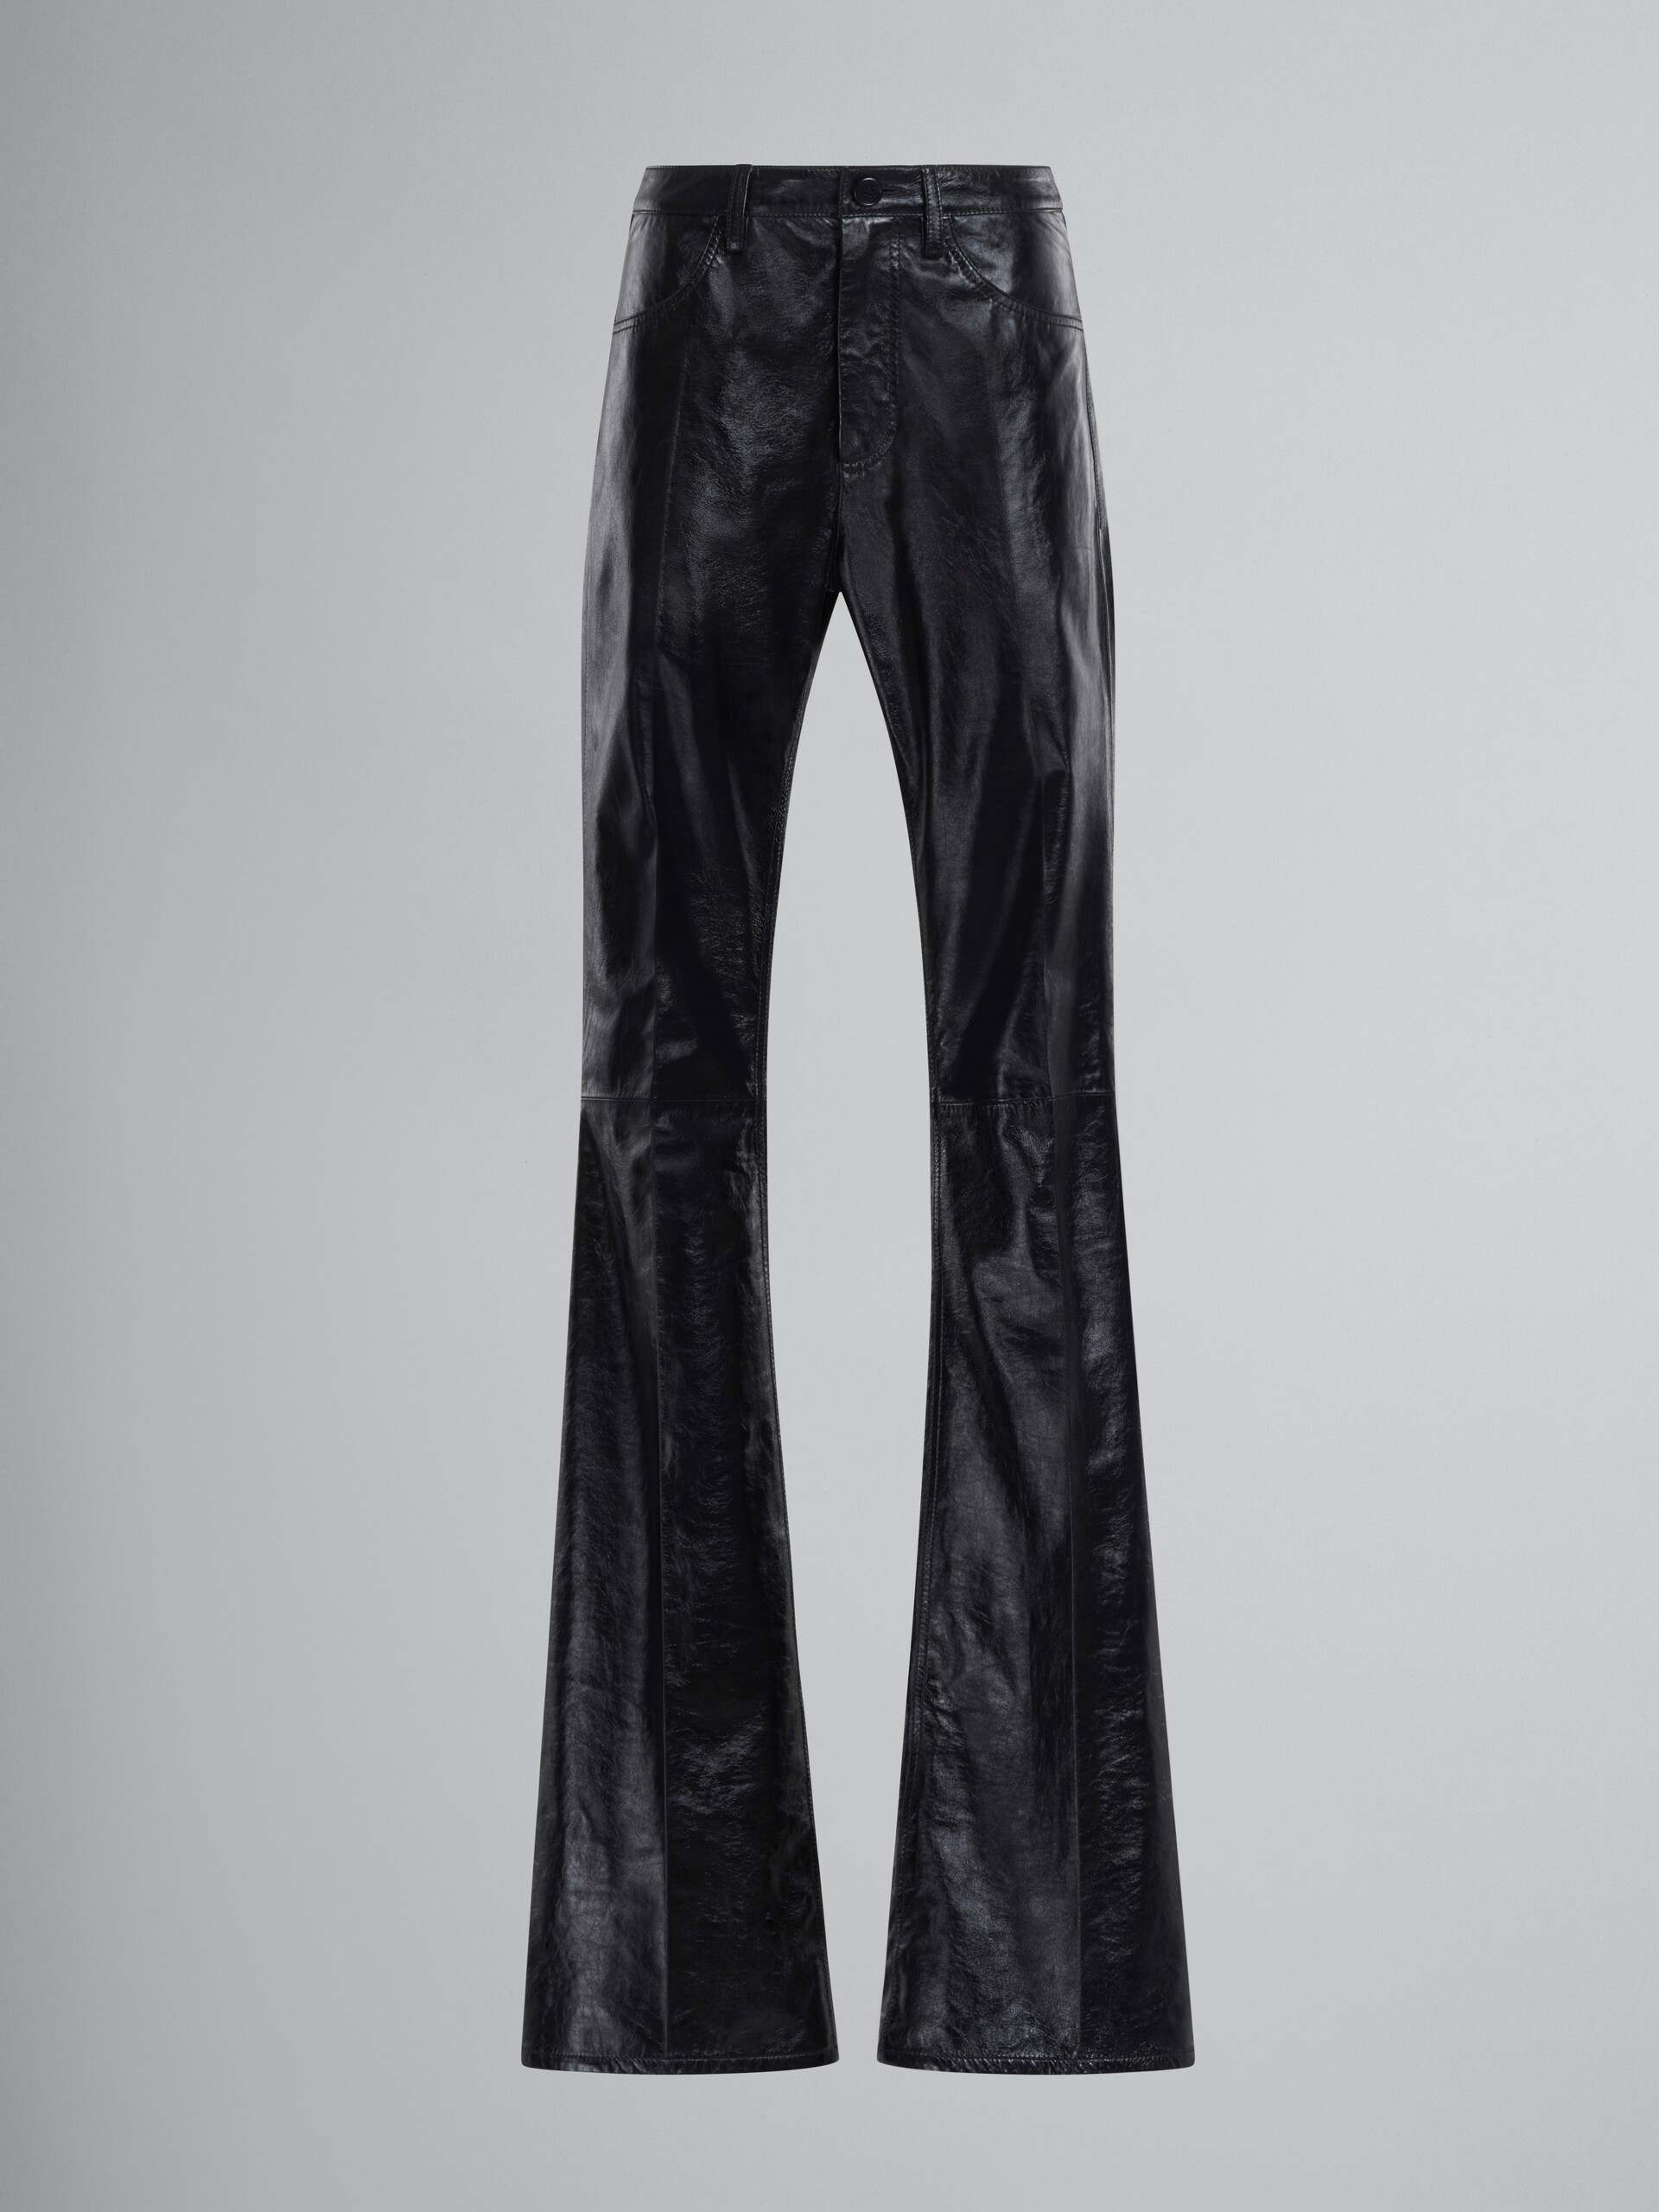 Black flared trousers in ultralight naplak leather - Pants - Image 1